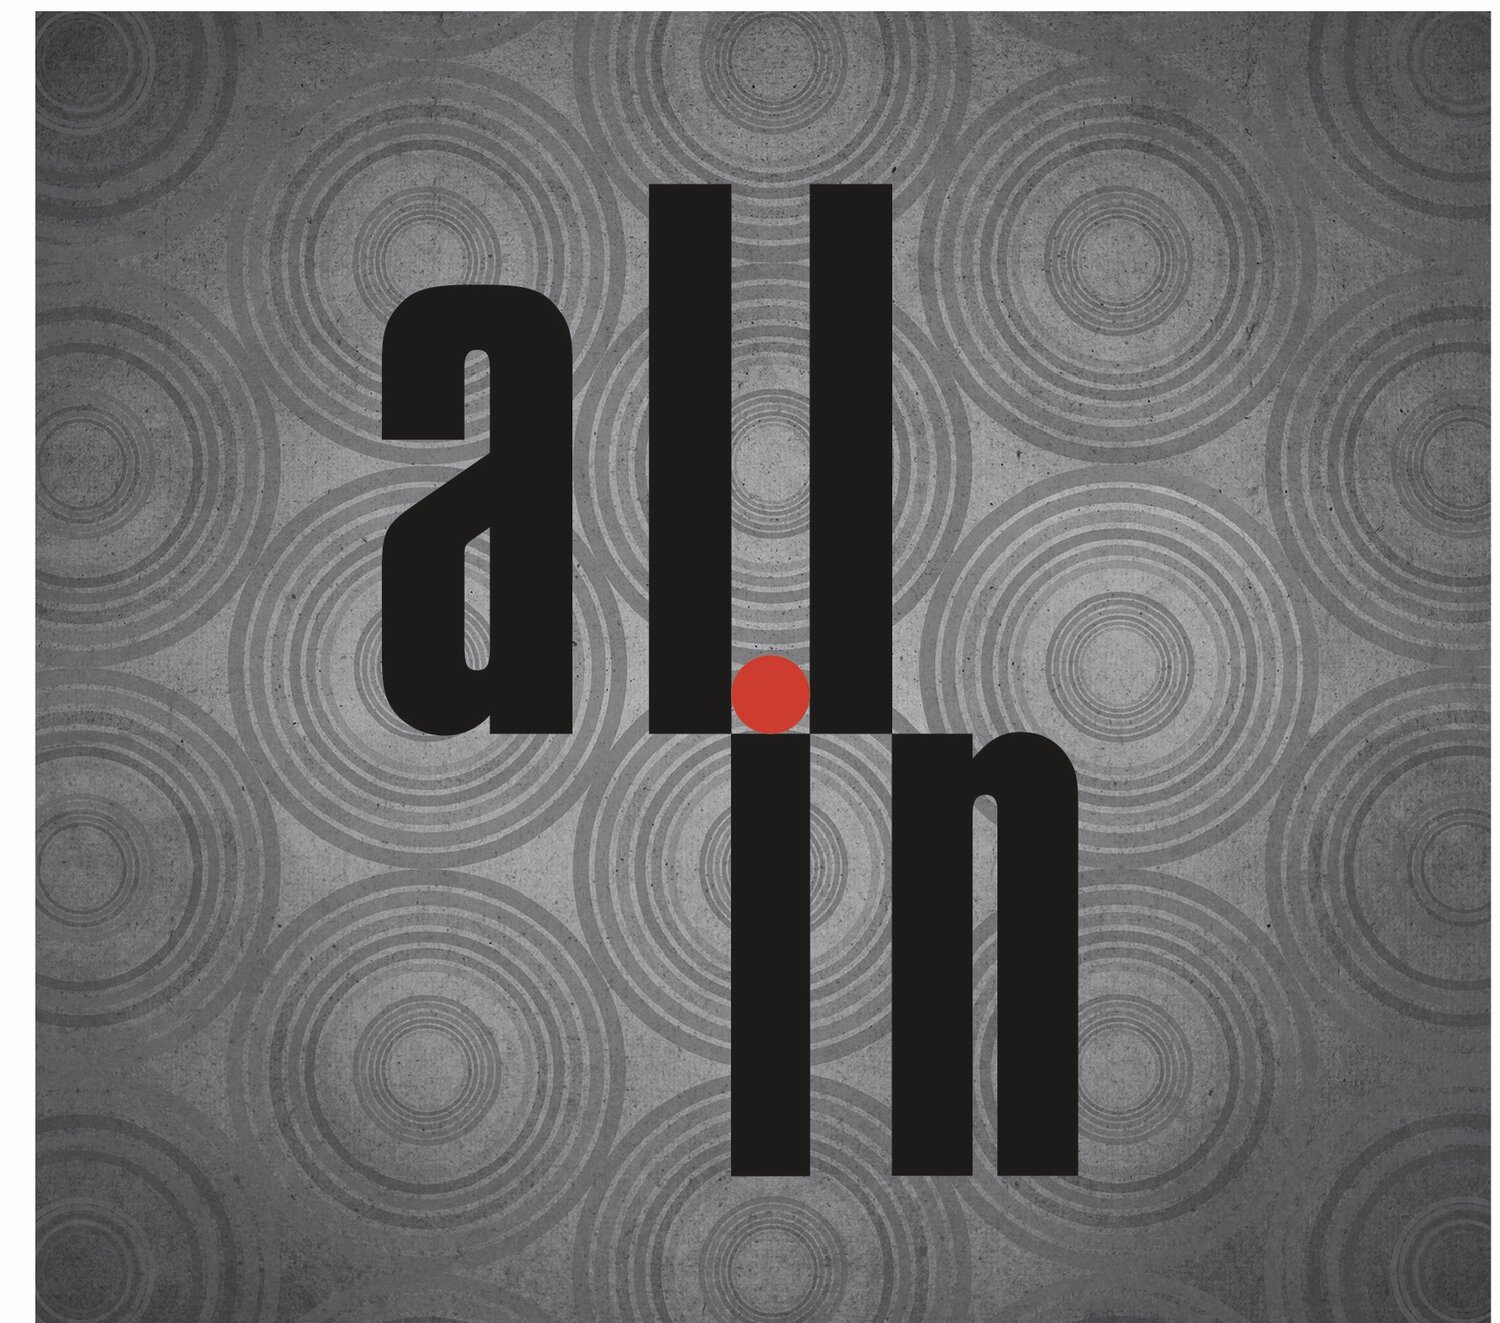 All In — music